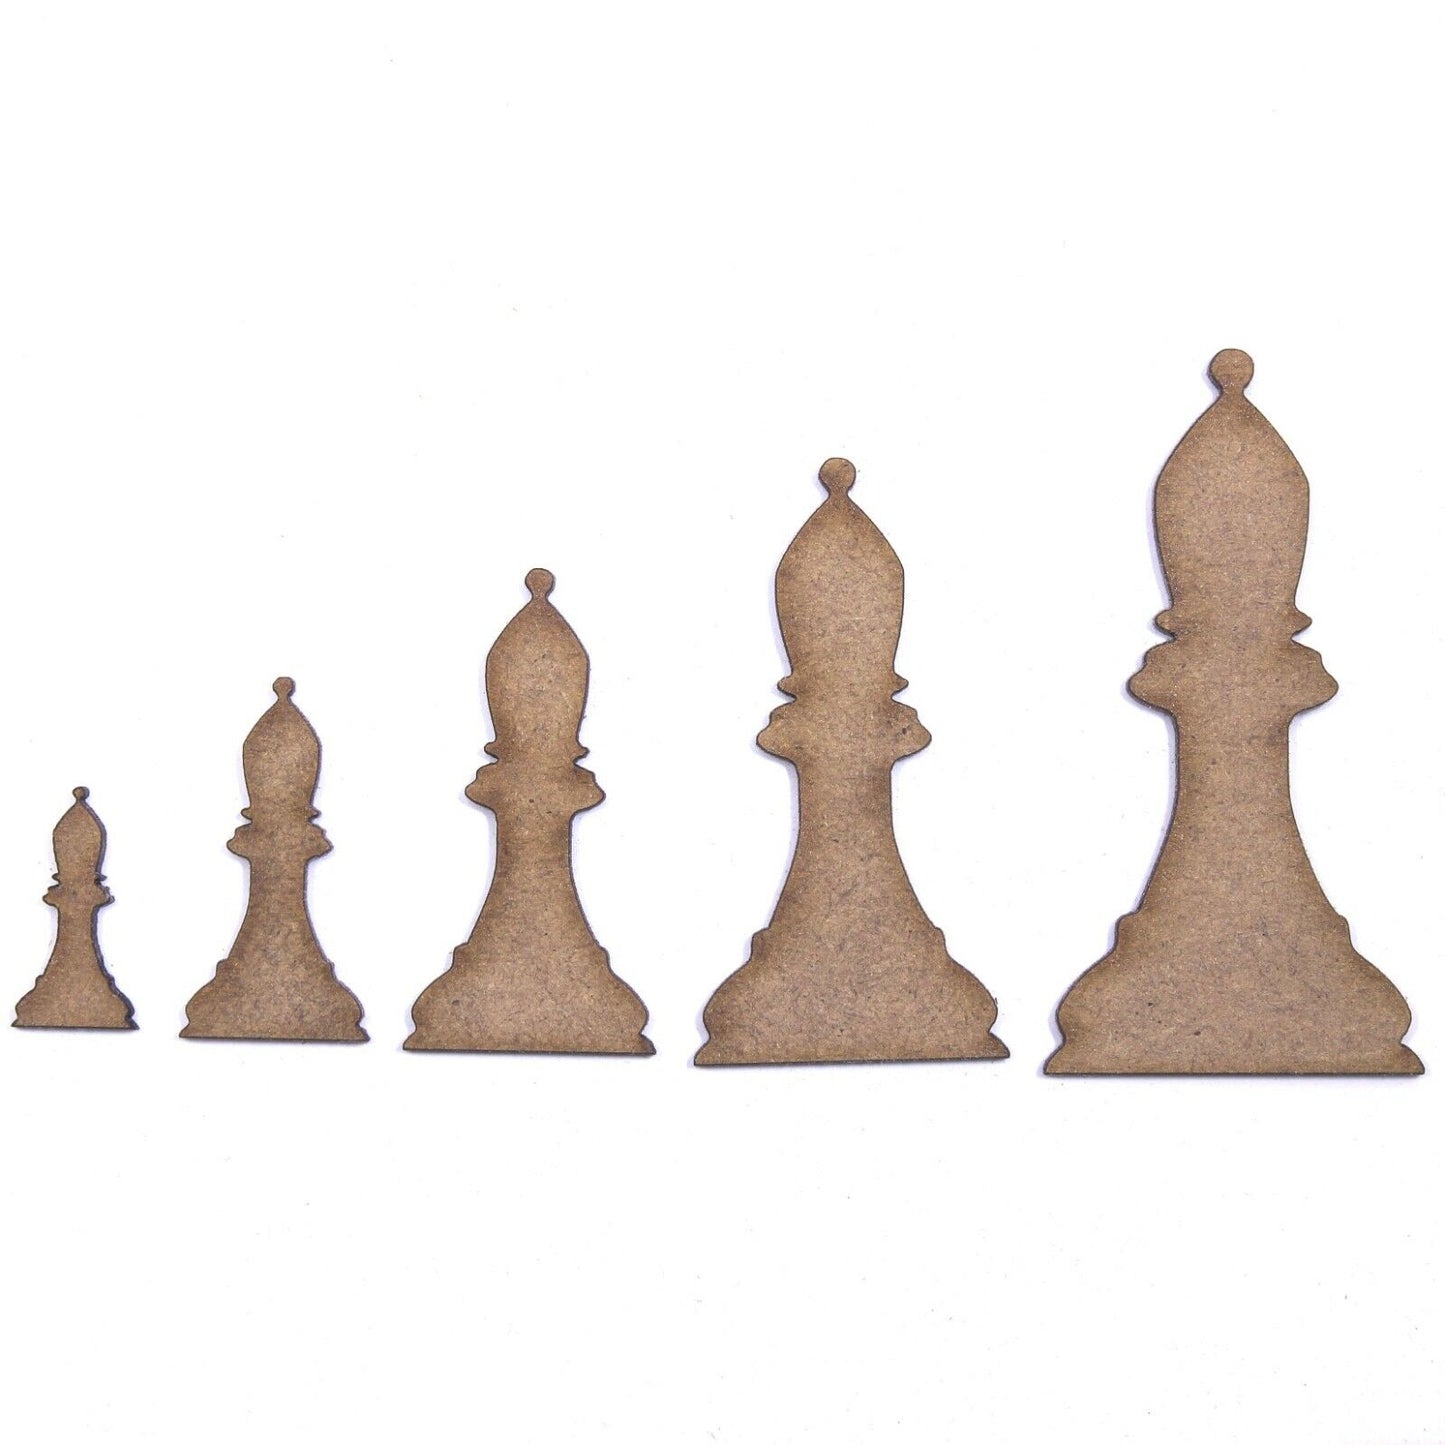 Bishop Chess Piece Craft Shape, Various Sizes, 2mm MDF Wood. Checkmate, board